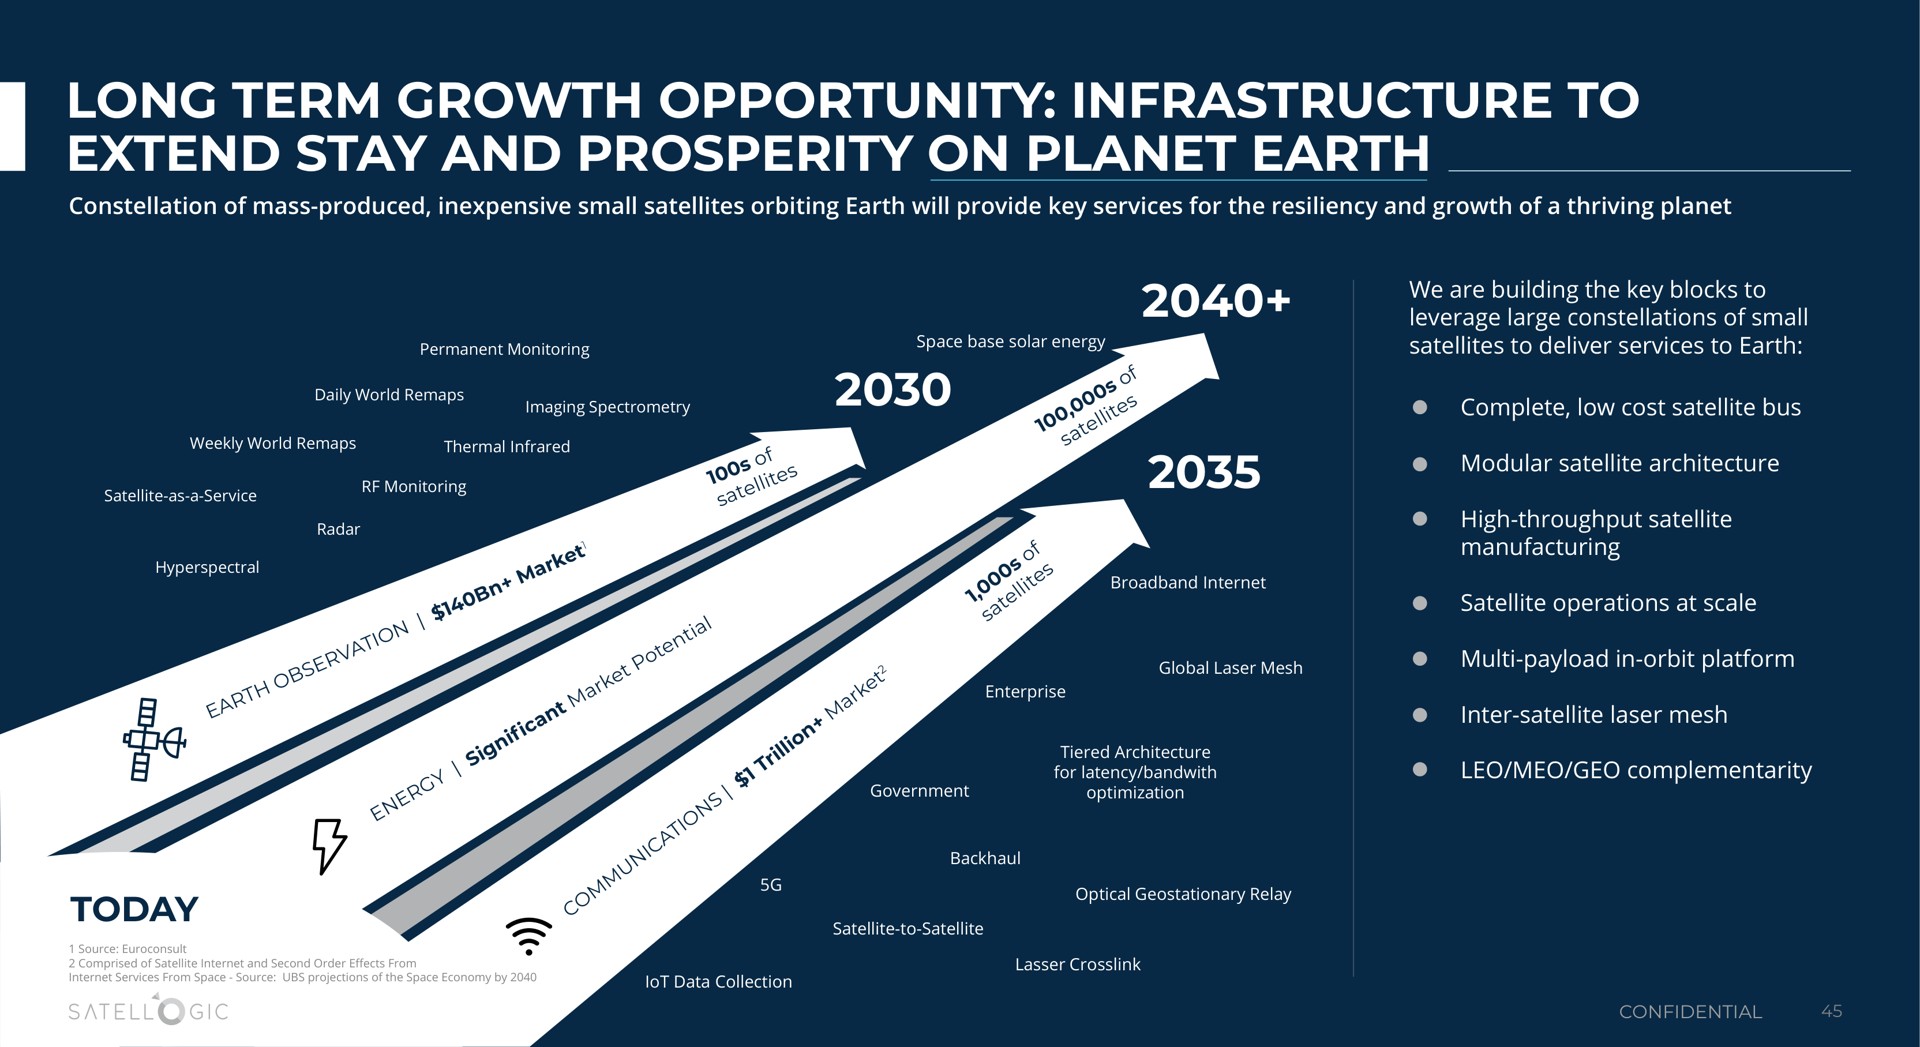 long term growth opportunity infrastructure to extend stay and prosperity on planet earth | Satellogic